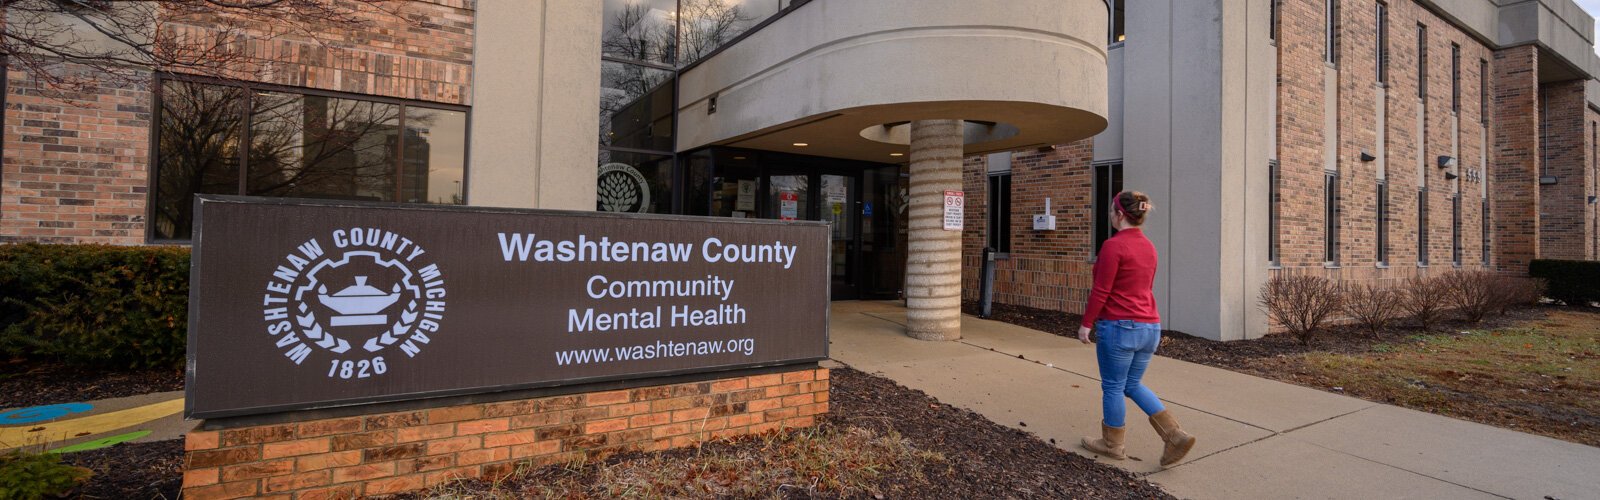 Washtenaw County Community Mental Health is a Certified Community Behavioral Health Clinic